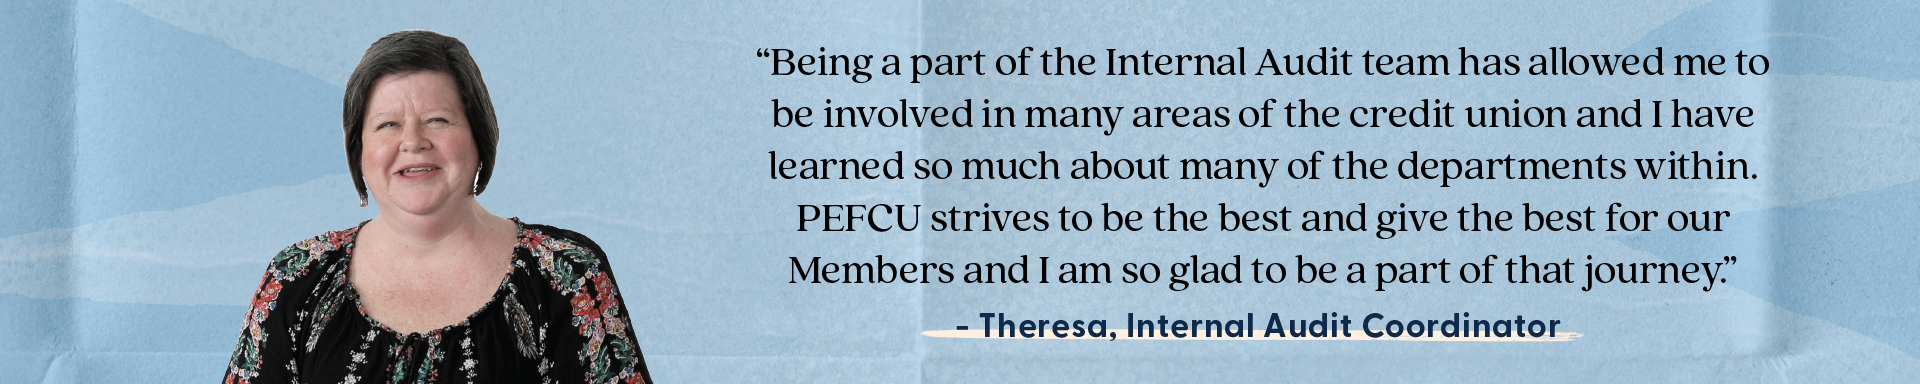 Being a part of the Internal Audit team has allowed me to be involved in many areas of the credit union and I have learn so much about many of the departments within